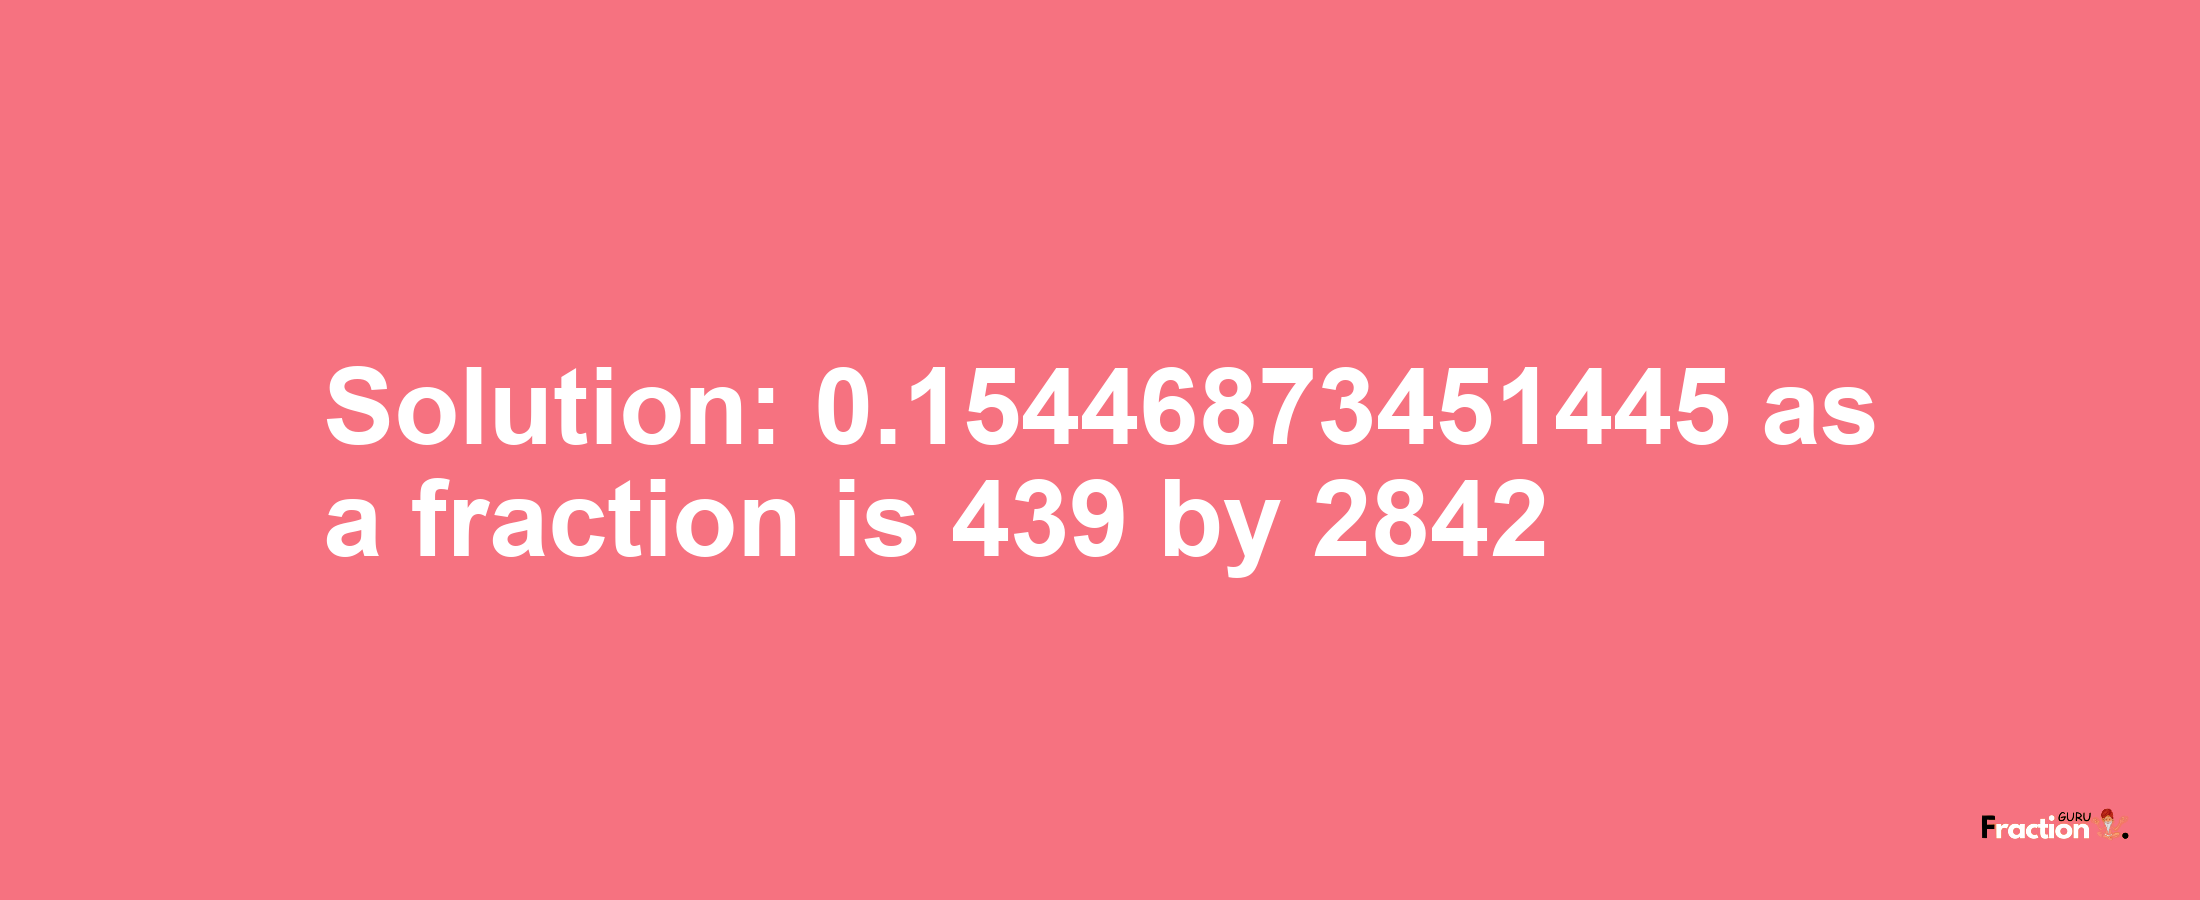 Solution:0.15446873451445 as a fraction is 439/2842